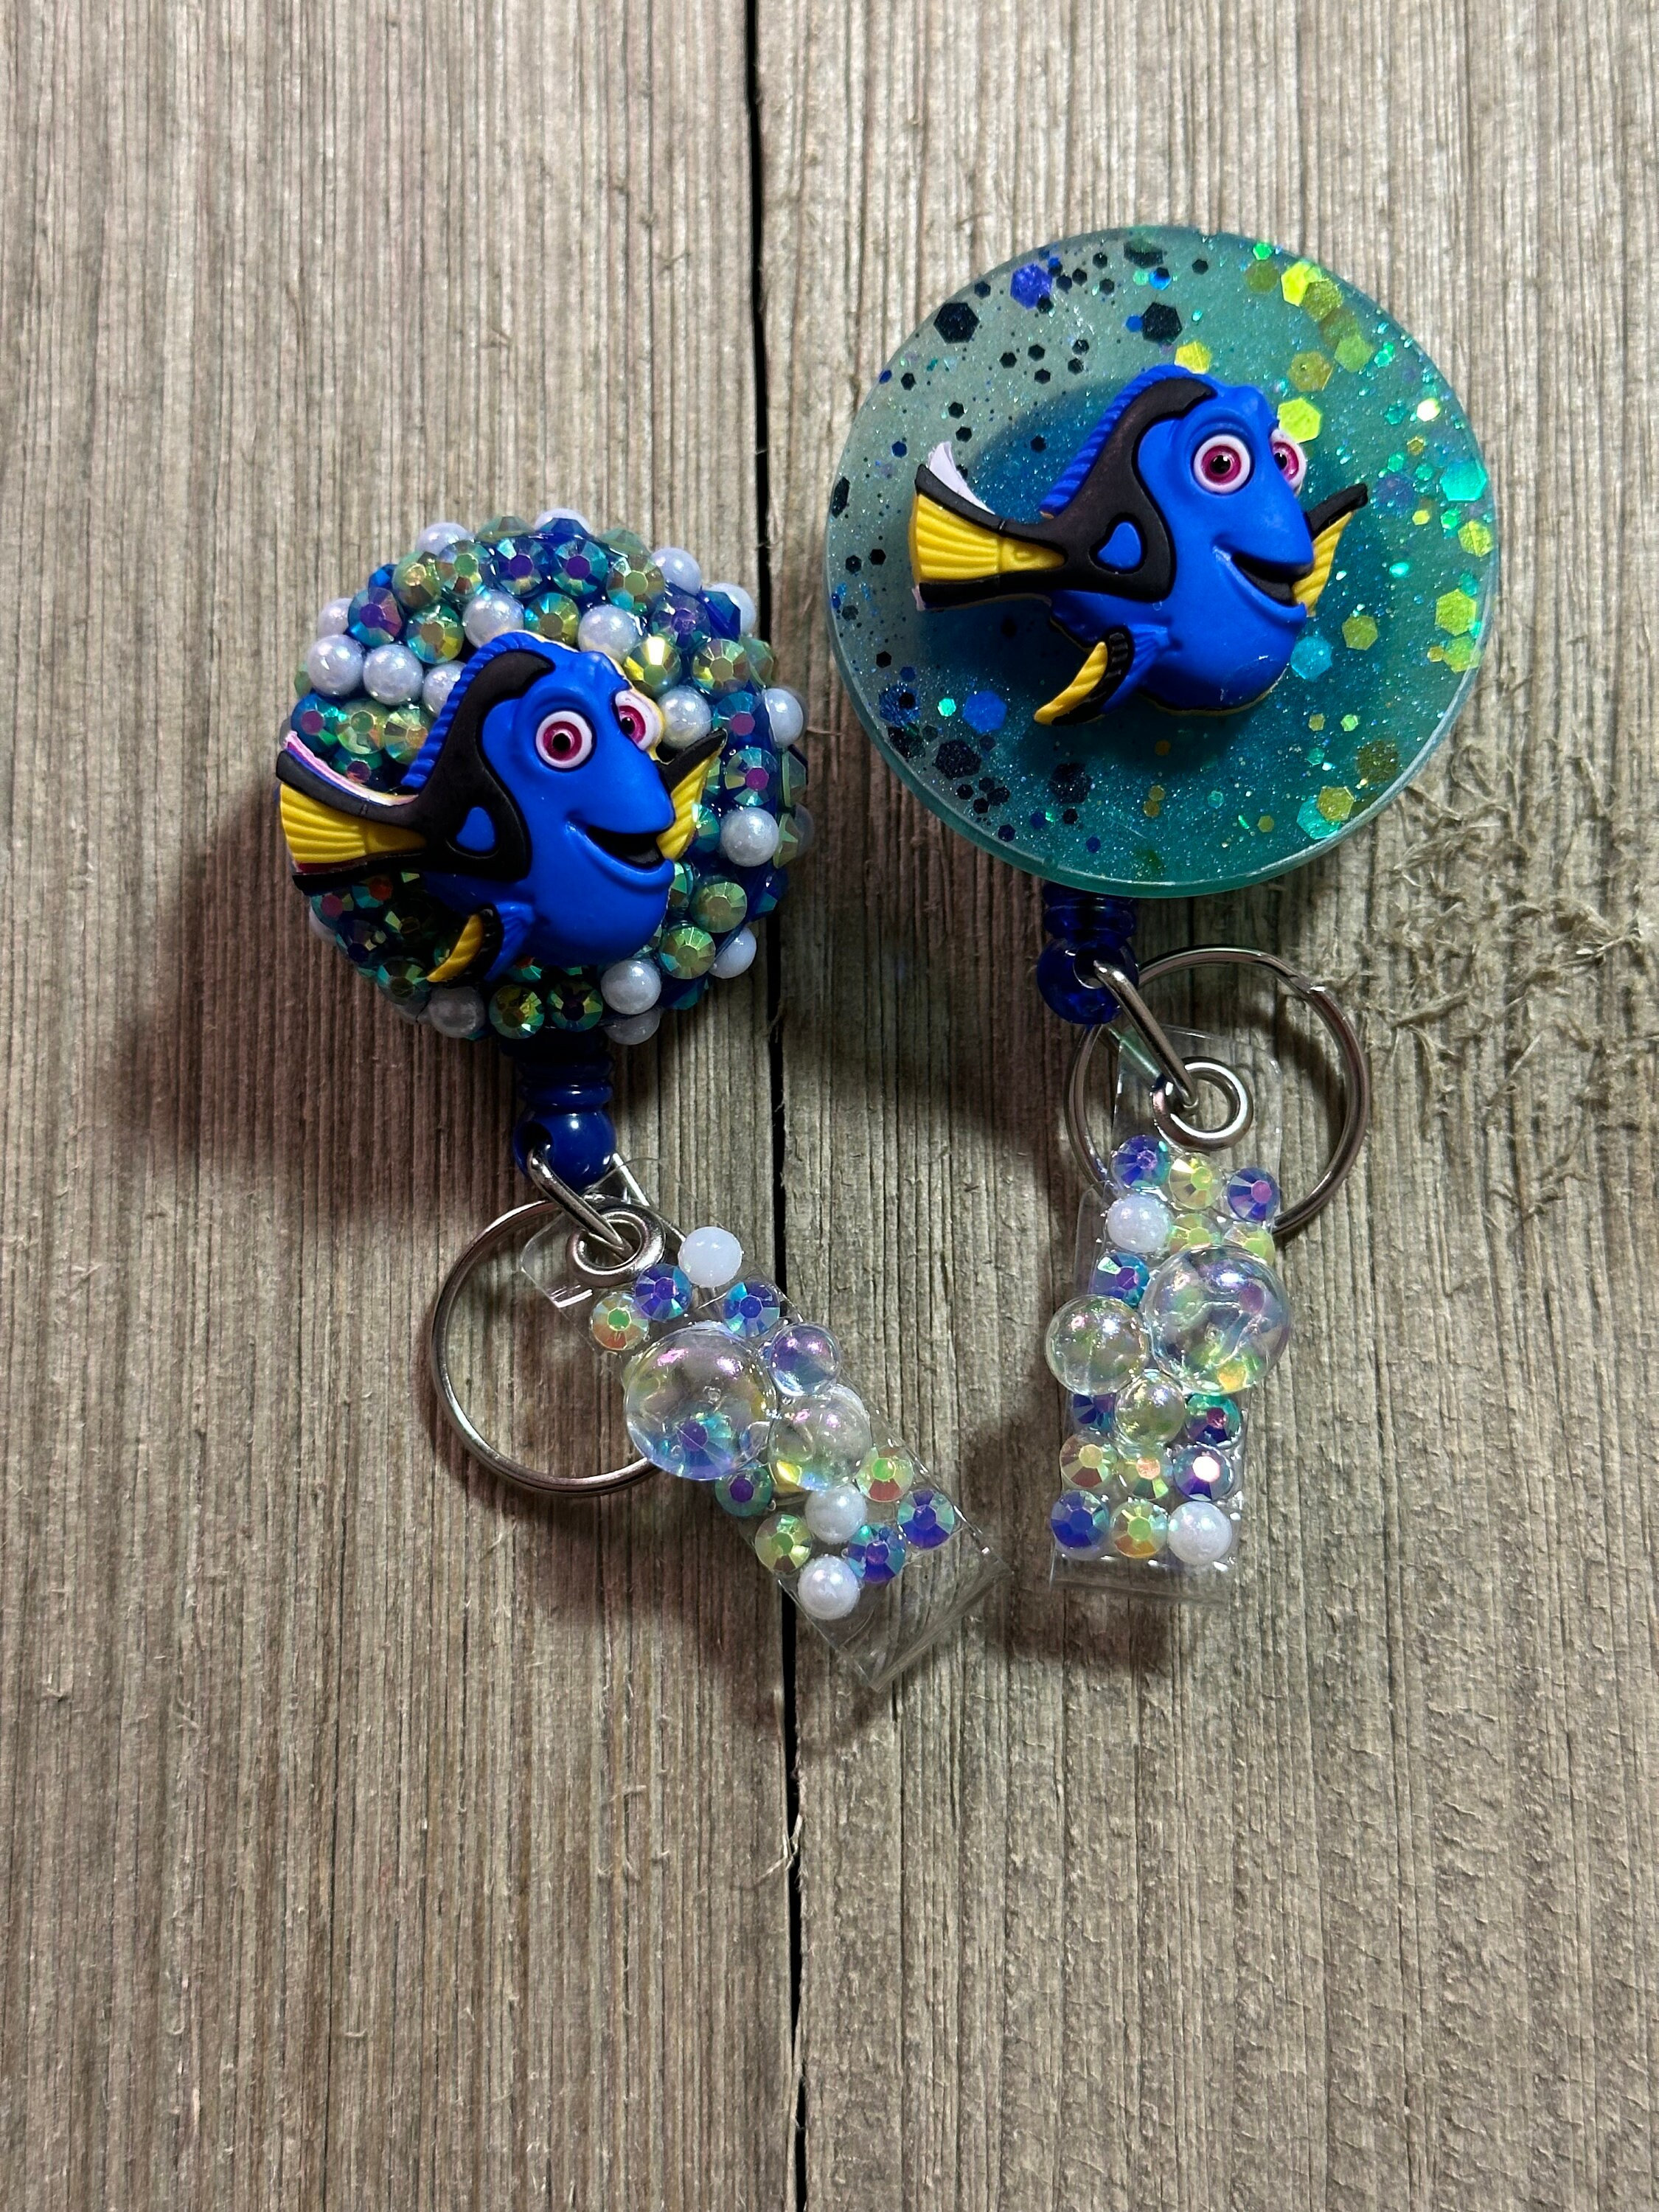 Finding Dory, Dory and Nemo Badge Reel, Badge Retractable Holder, ID  Retractable Holder, Baseball ID Holders, Unique Badge Holder 